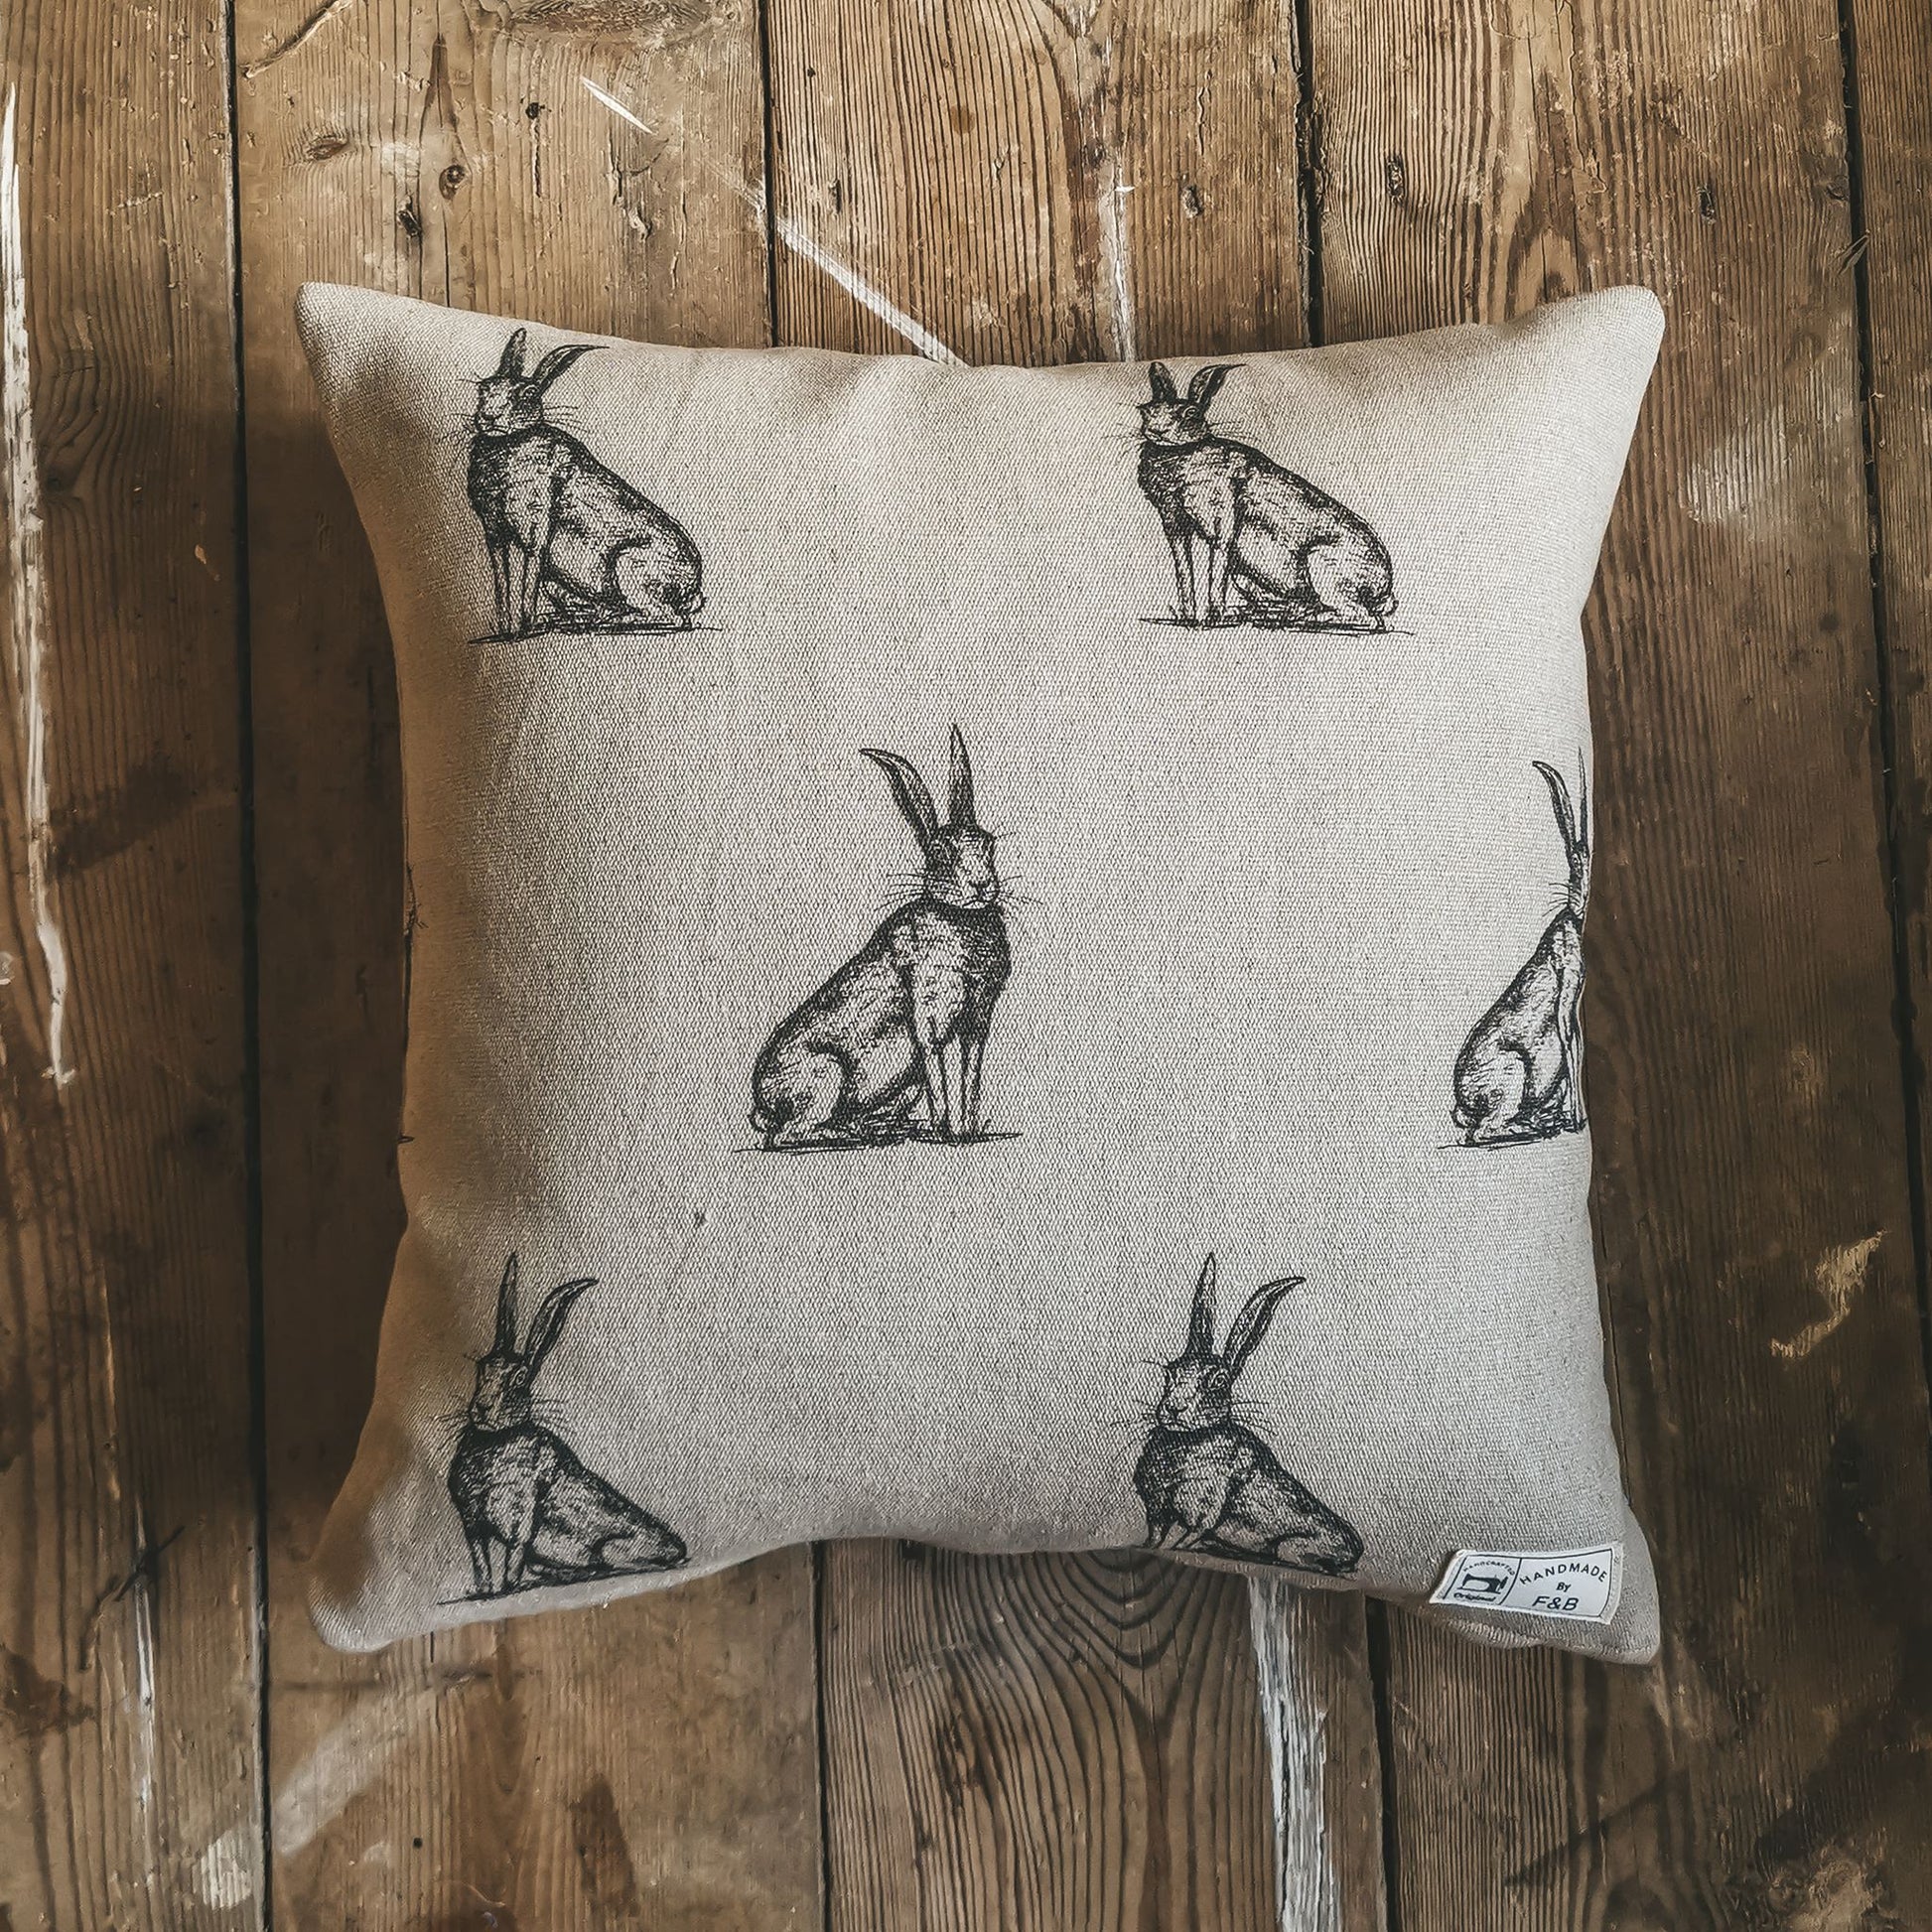 Woodland Friends Hare Print Cushion - Handmade in Yorkshire - F&B international - Made by Bethany Todd